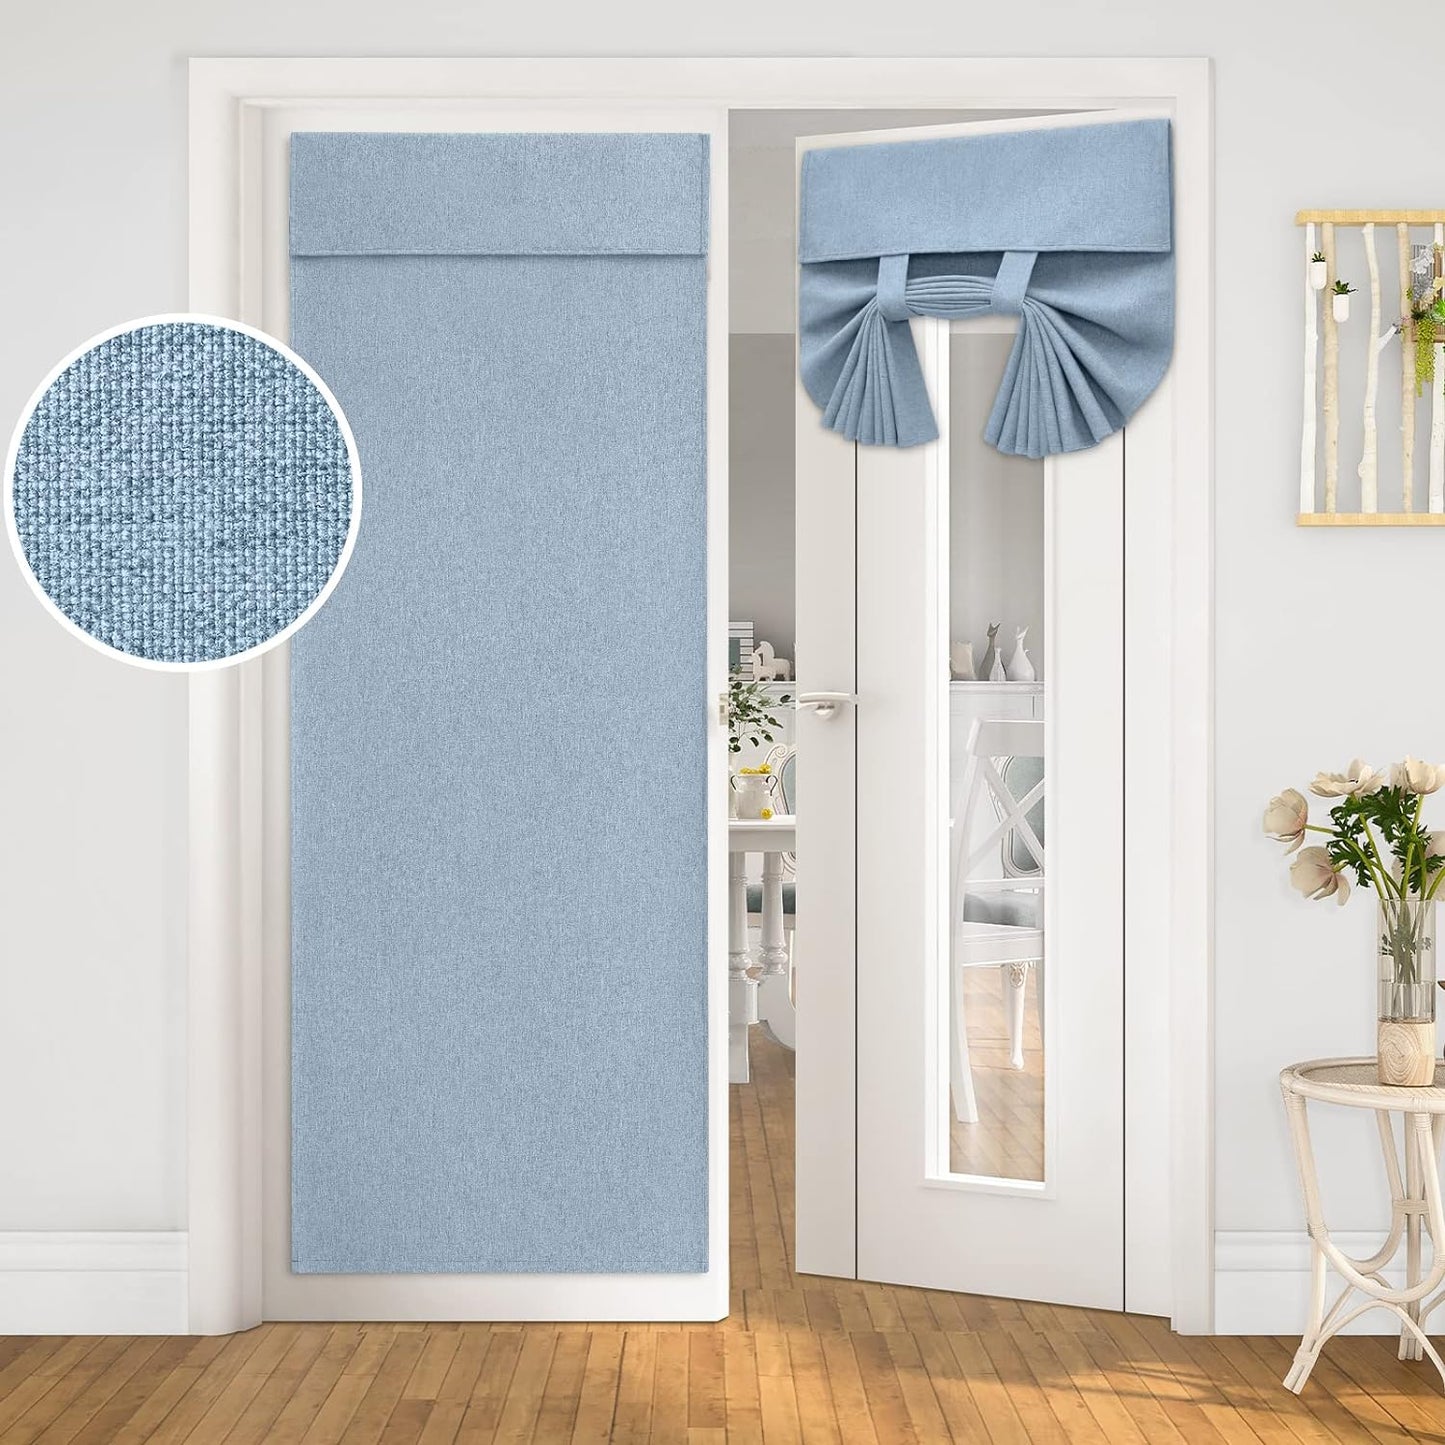 HOMEIDEAS Natural Linen French Door Curtains, Privacy Door Window Curtains Panel, French Door Shade for Door Window, Thermal Insulated Door Window Covering for Bedroom, W26 X L40 Inch, 1 Panel  HOMEIDEAS Light Blue 1 Panel-W26" X L68" 